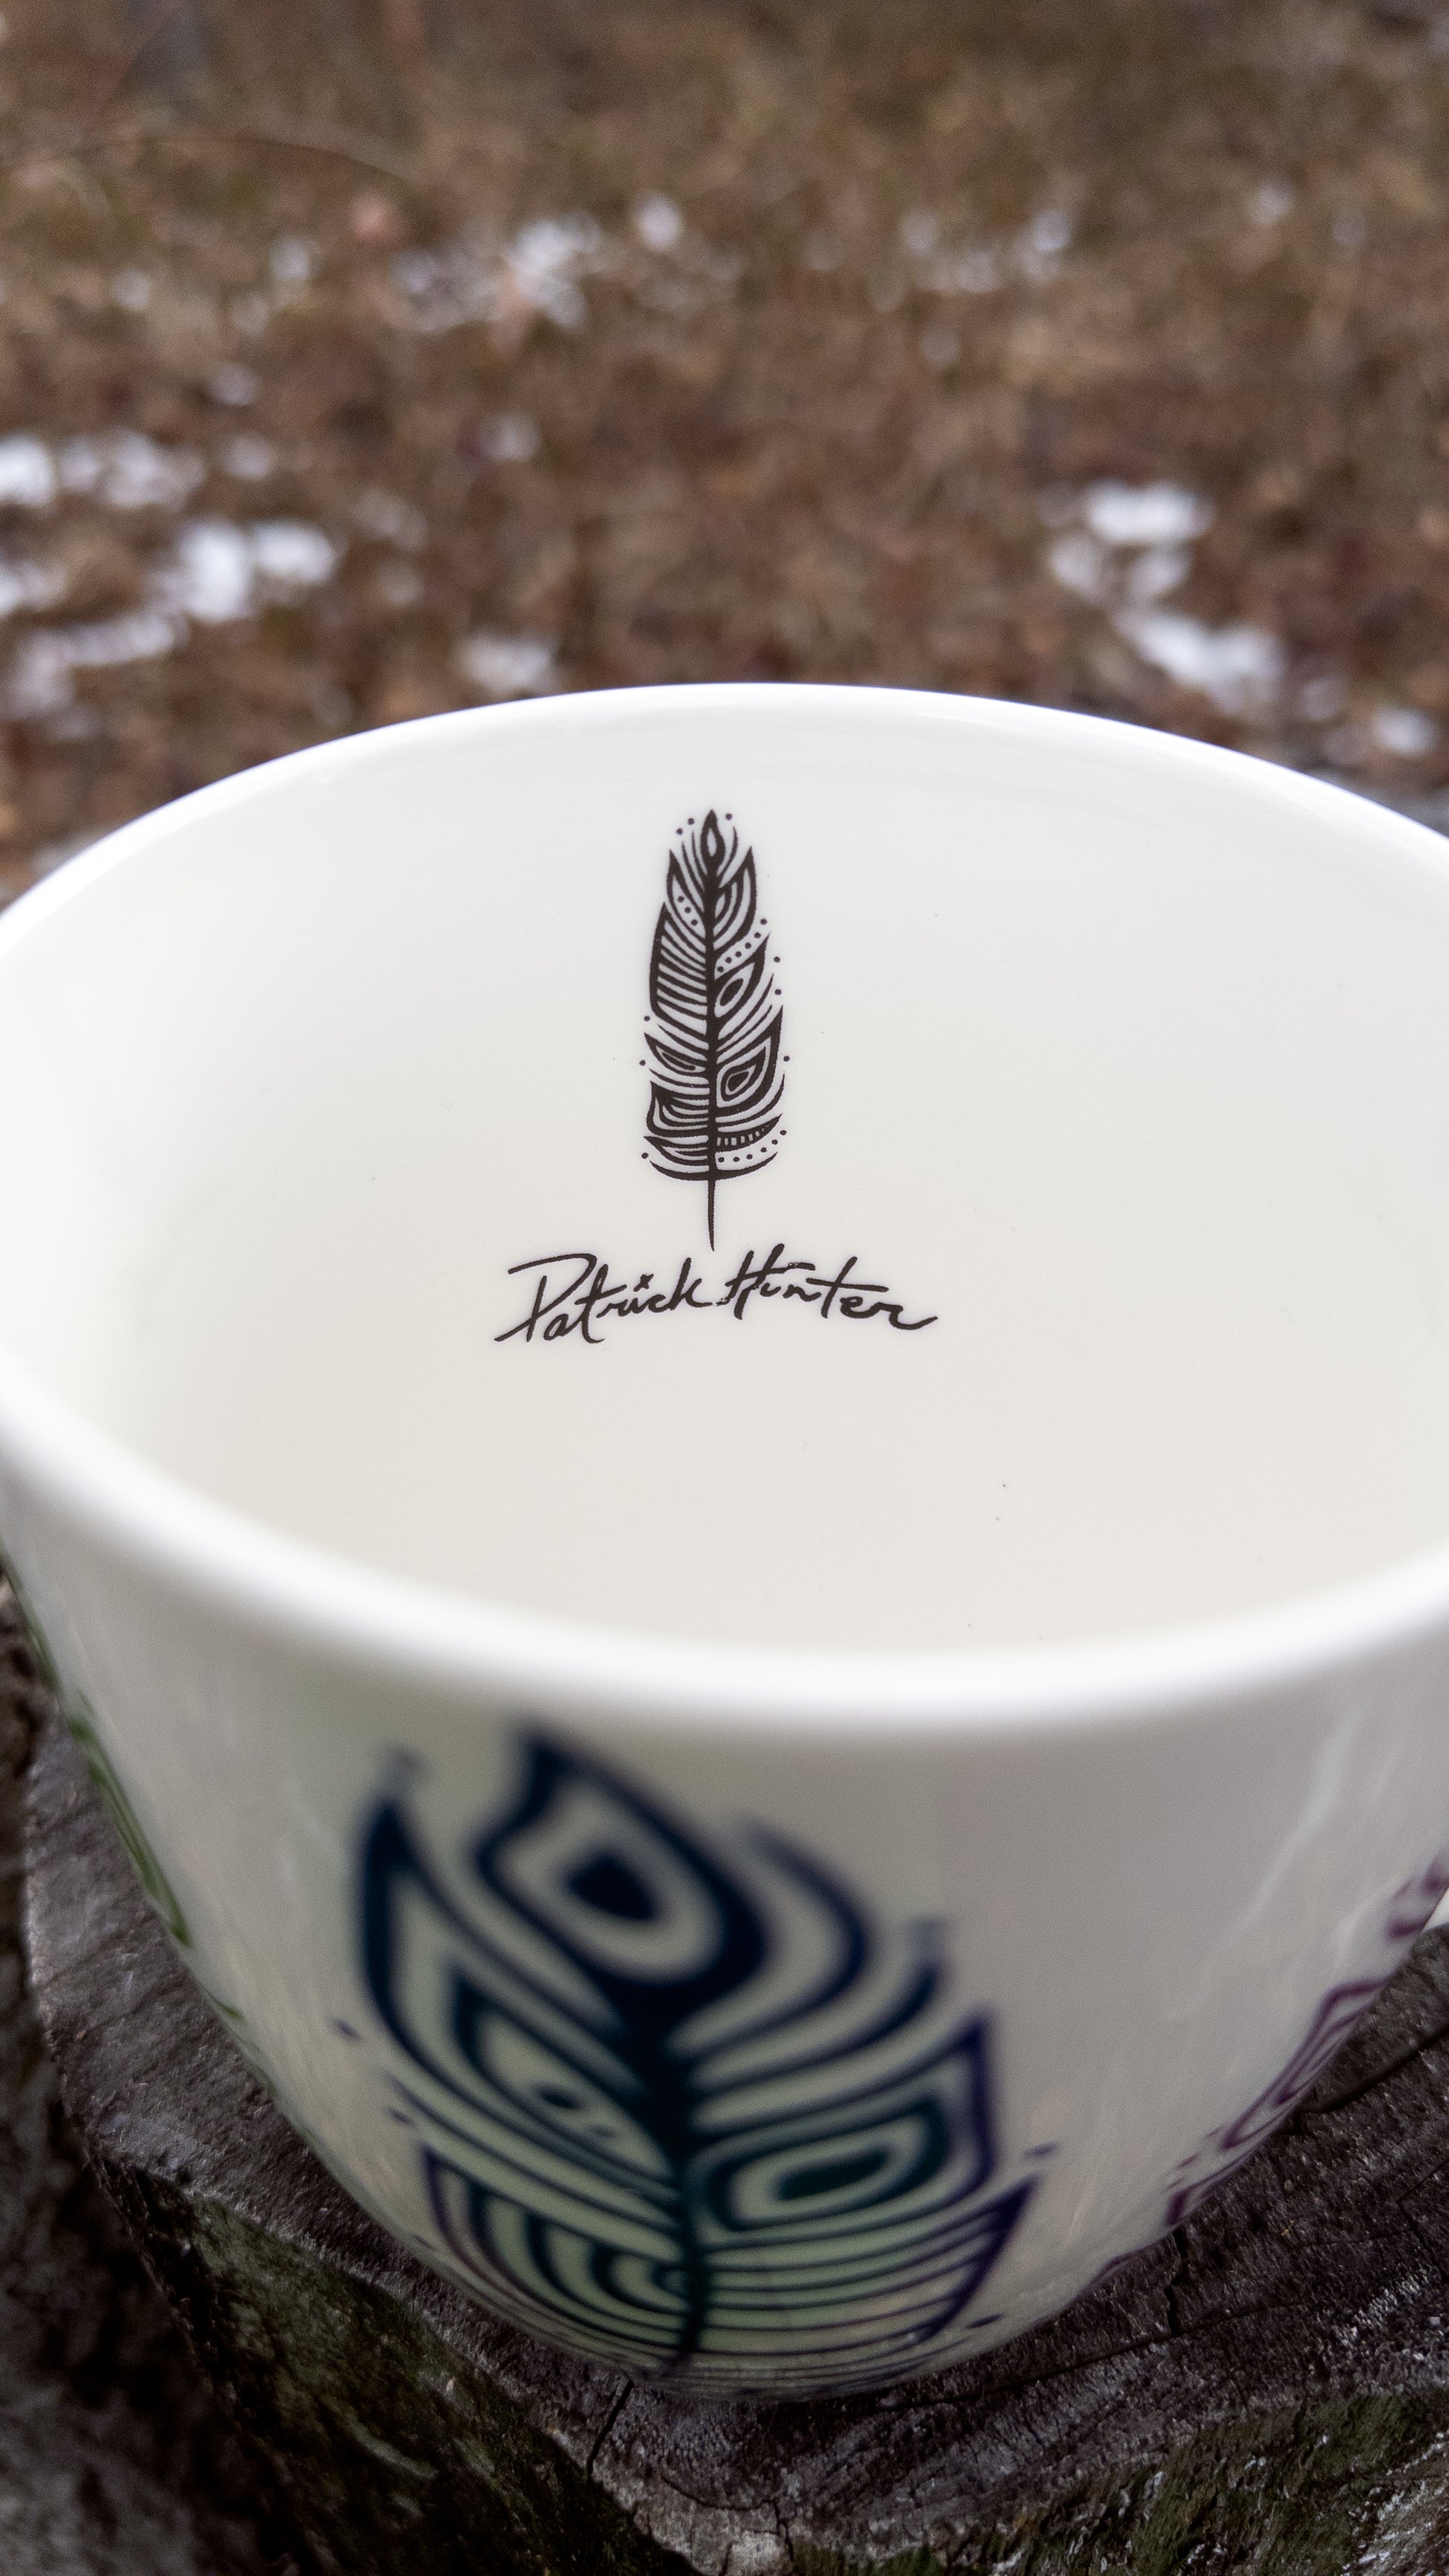 A glimpse inside the Pride Feathers mug that shows Patrick Hunter's signature and signature eagle feather on the inside just below the rim.